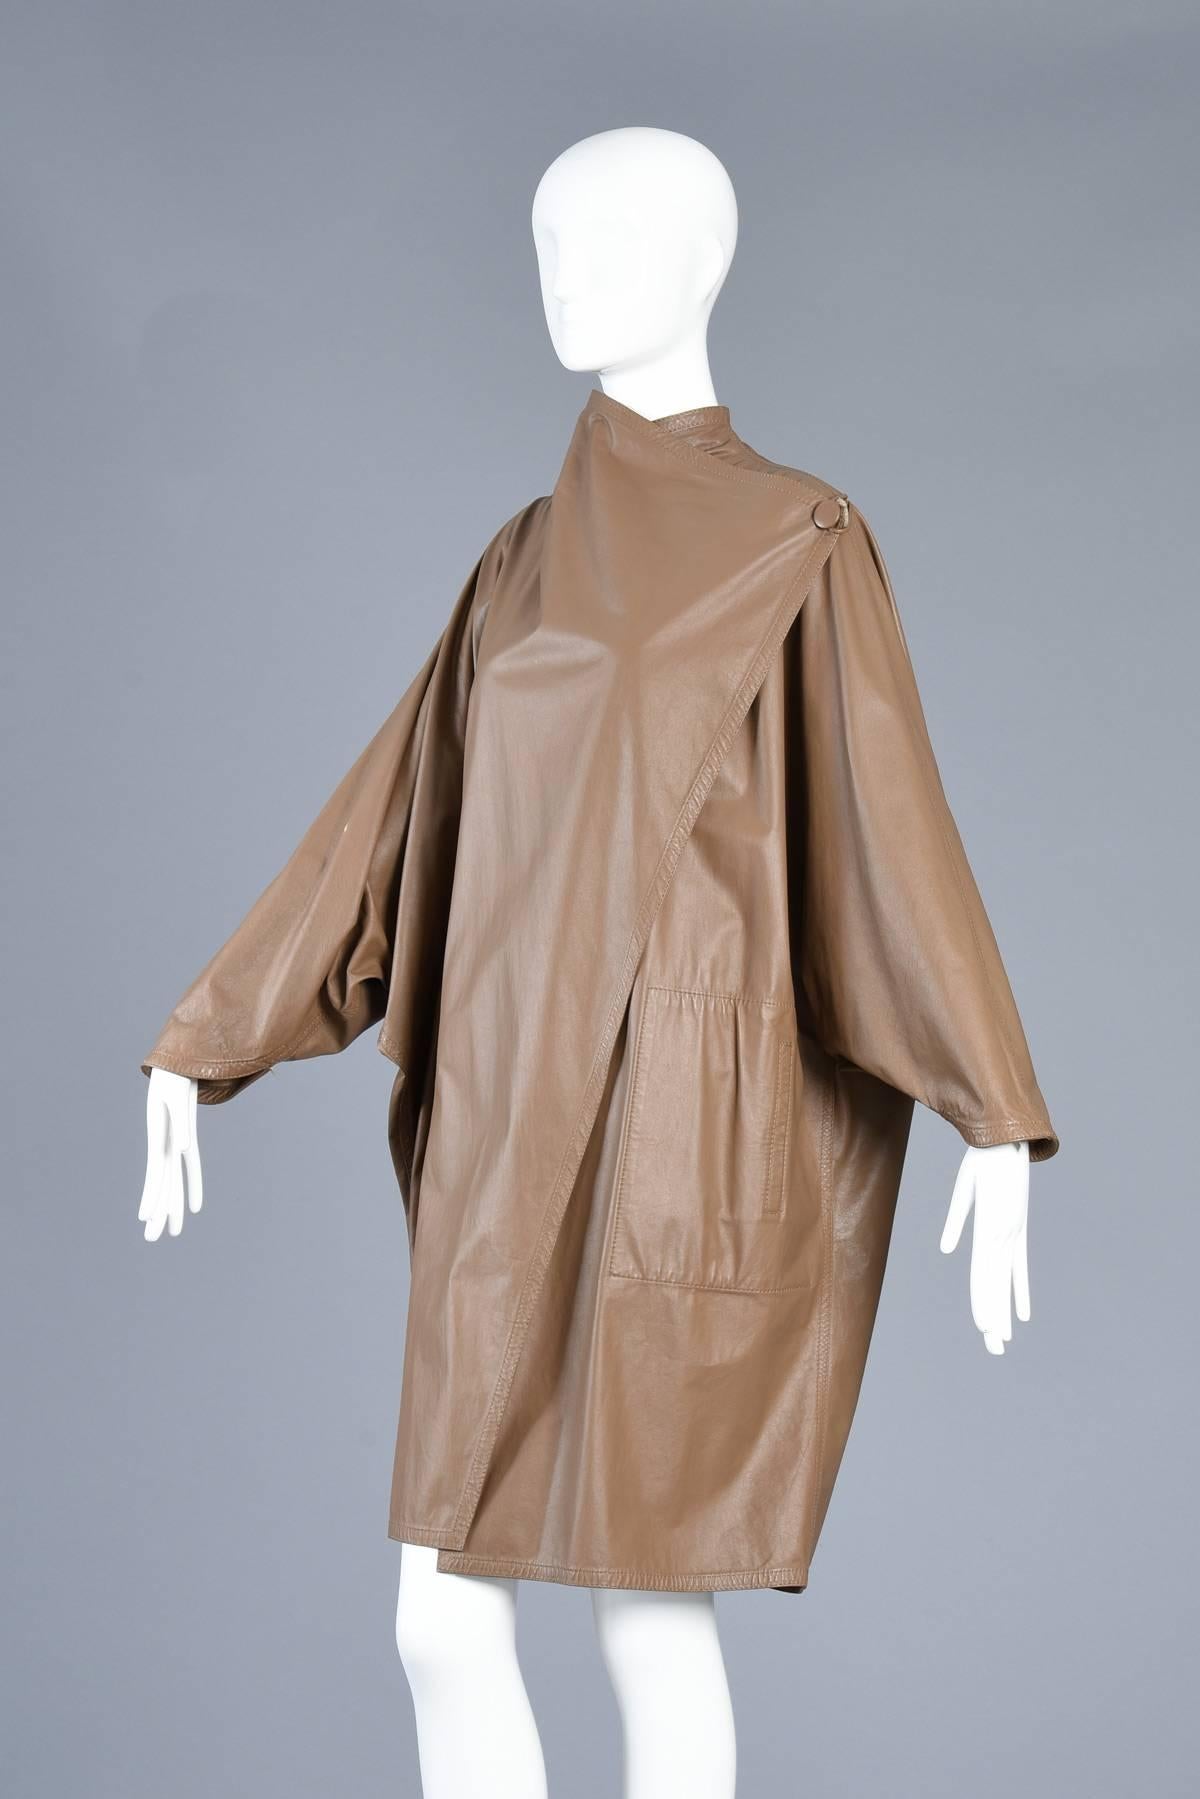 Incredible 1980s Reversible Suede Leather Avant Garde Draped Cape For Sale 5